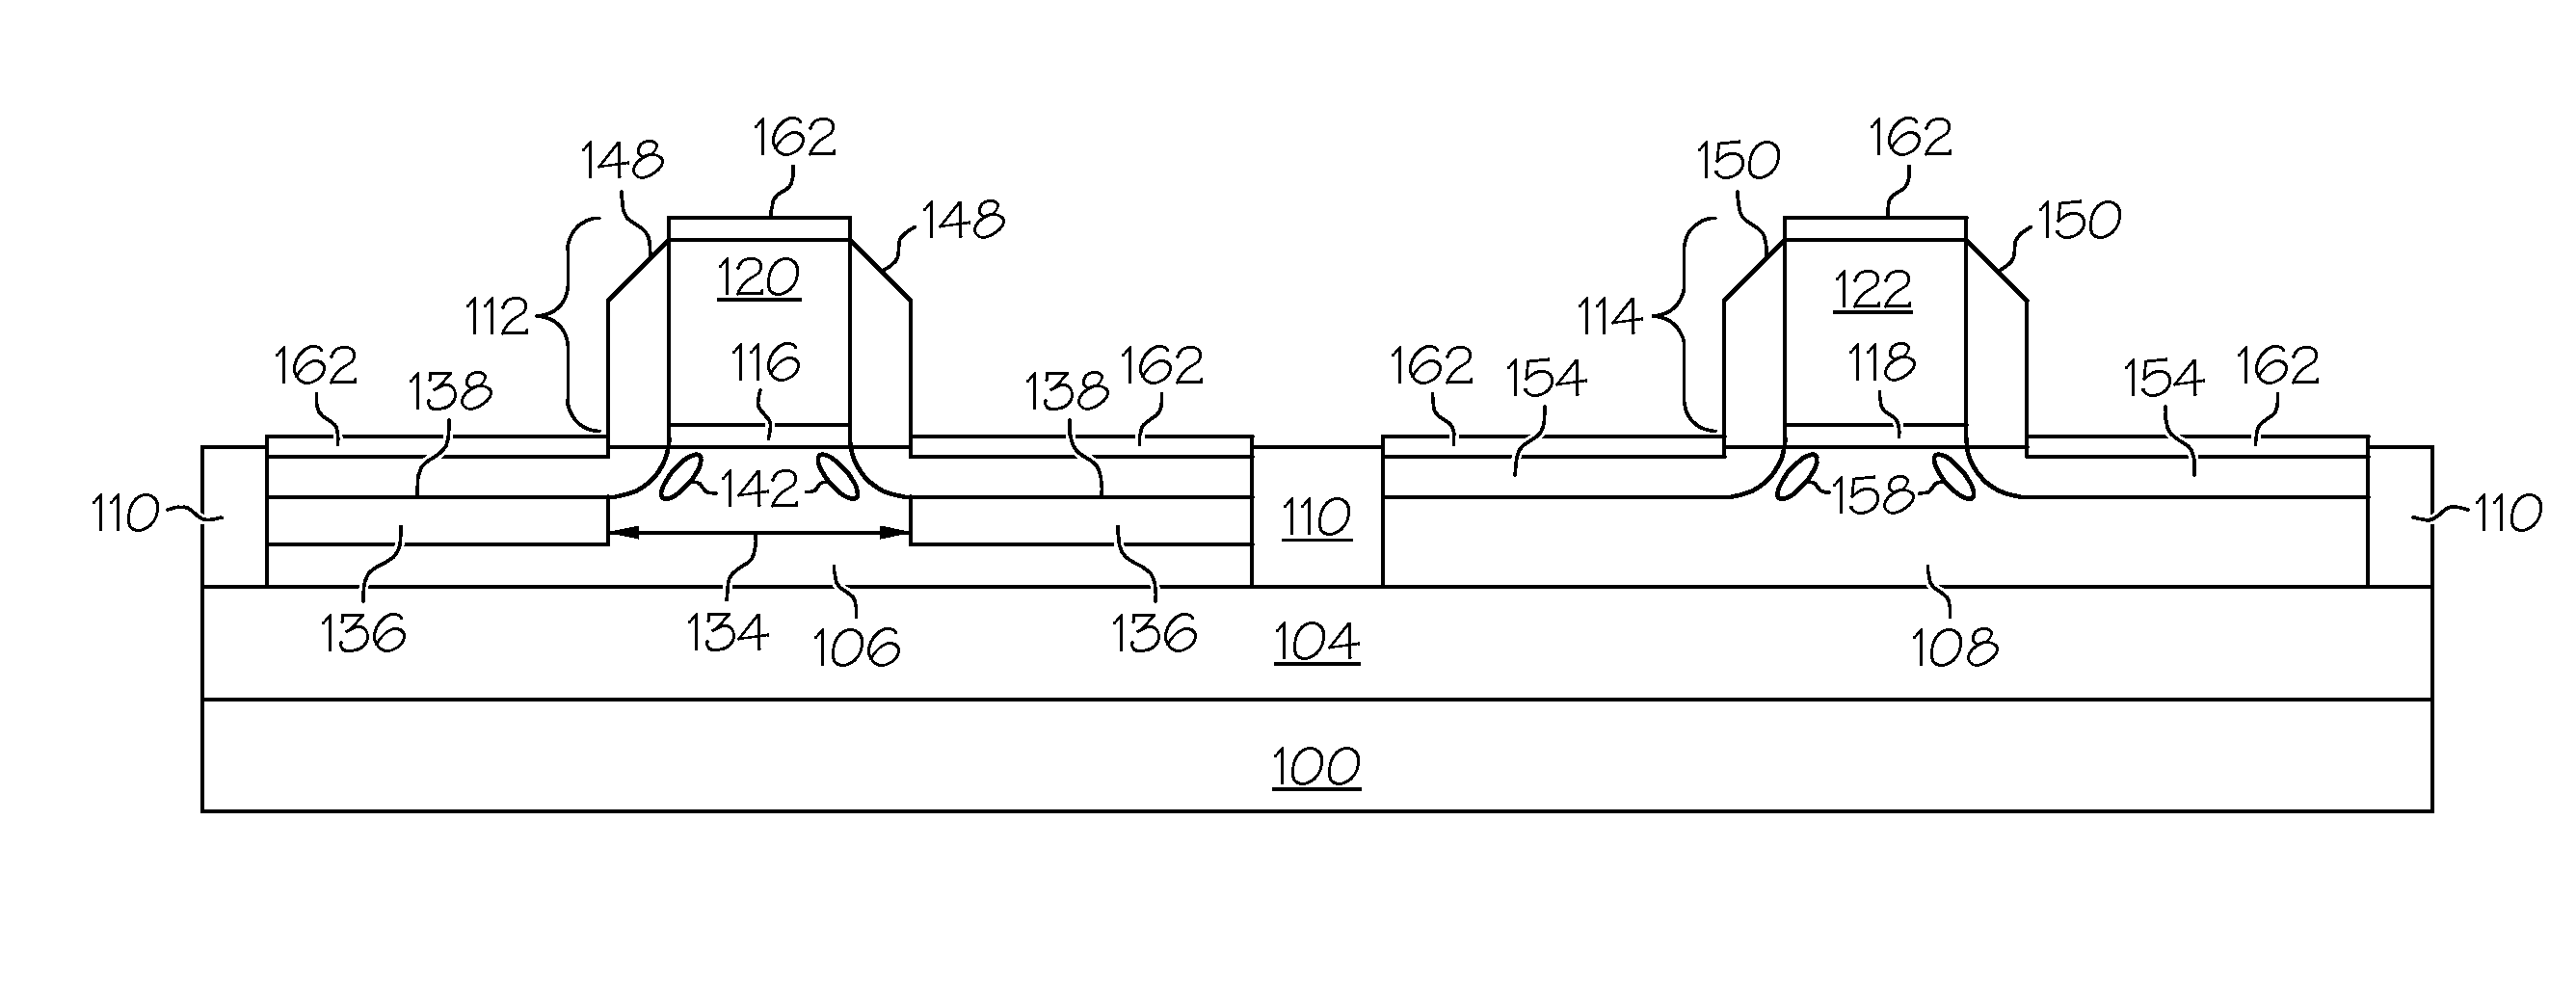 Method for fabricating a semiconductor device with self-aligned stressor and extension regions